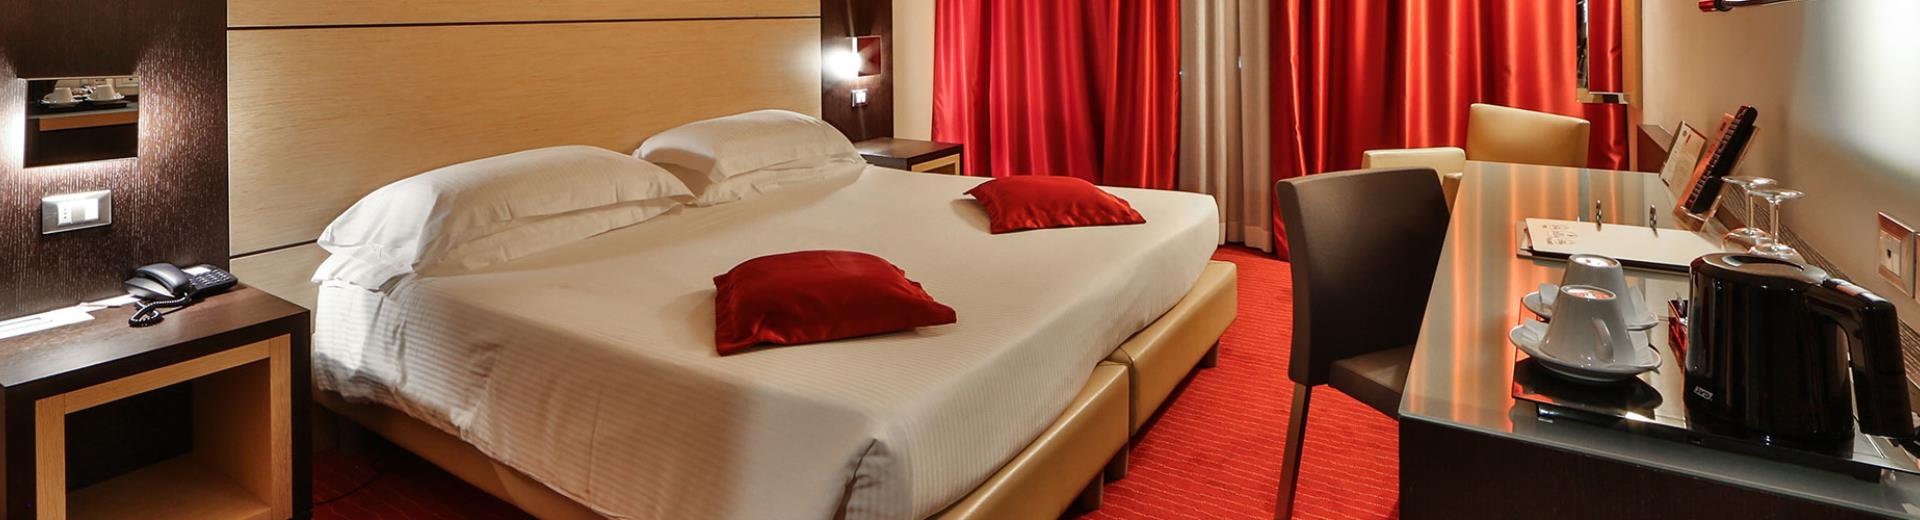  Looking for a hotel for your stay in Padova (PD)? Book/reserve at the Best Western Plus Hotel Galileo